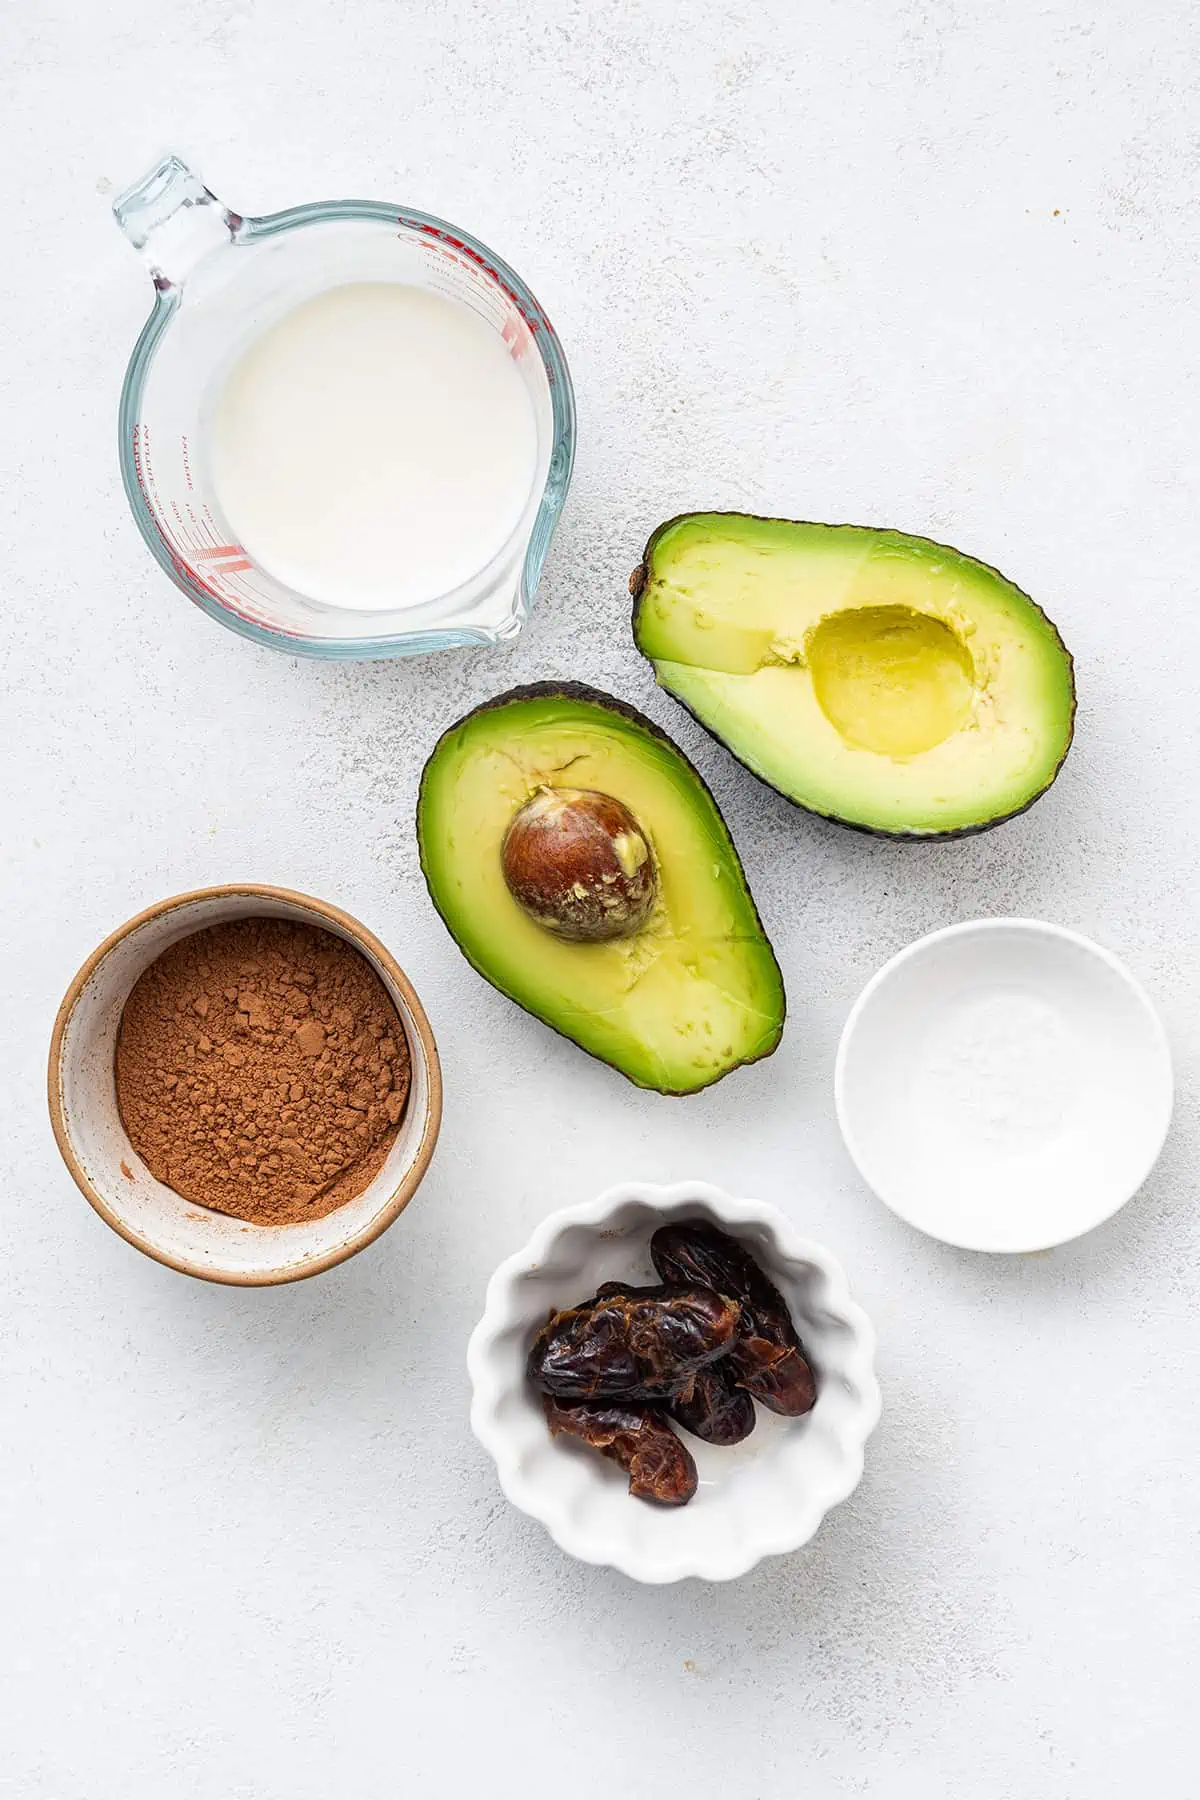 Overhead view of the ingredients needed for dark chocolate avocado mousse: an avocado cut in half, a bowl of dates, a bowl of cacao powder, a bowl of vegan milk, and a bowl of salt